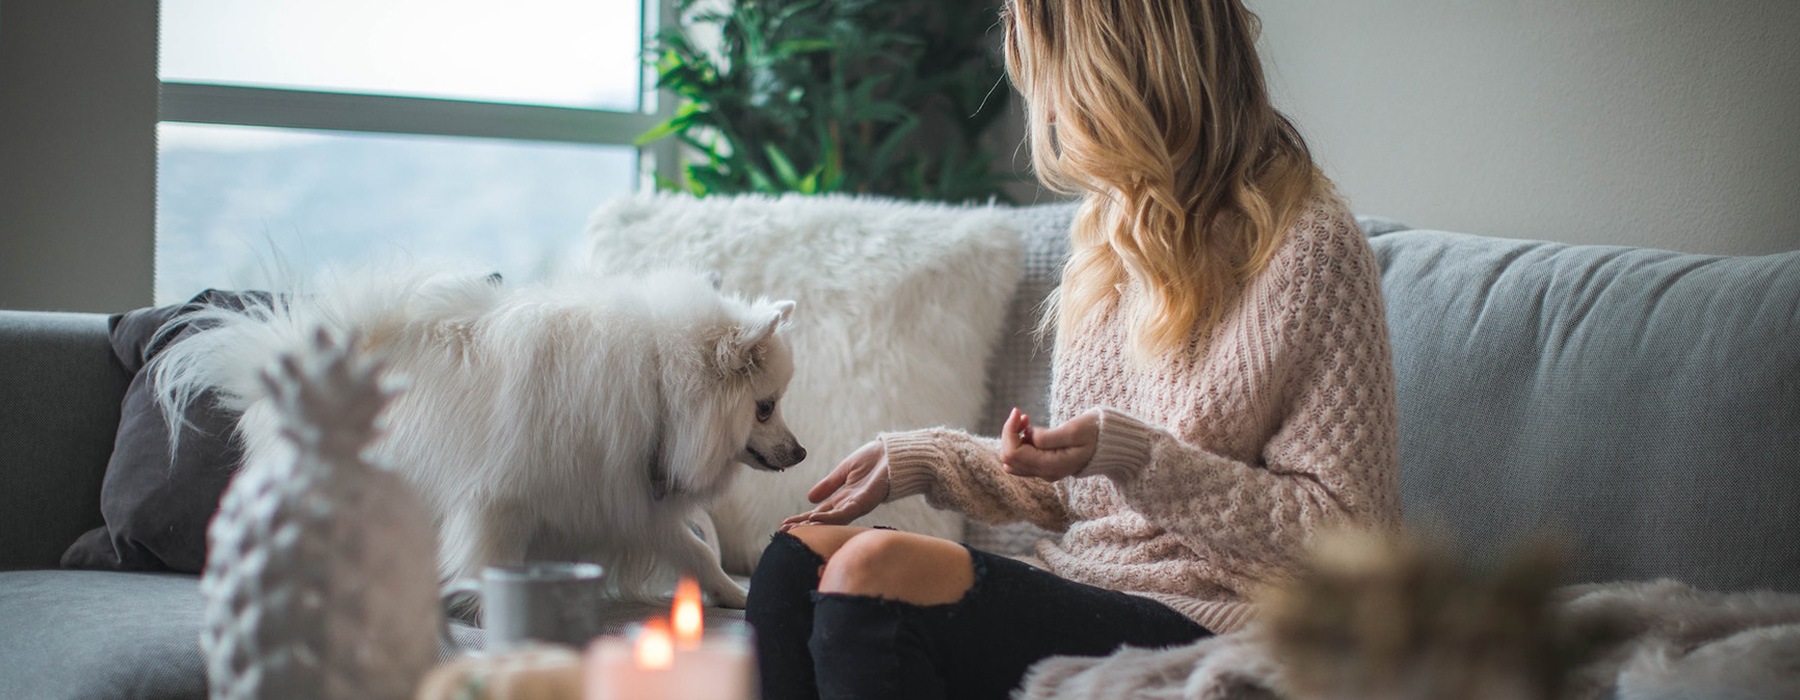 lifestyle image of a woman on a couch with her pet and some coffee